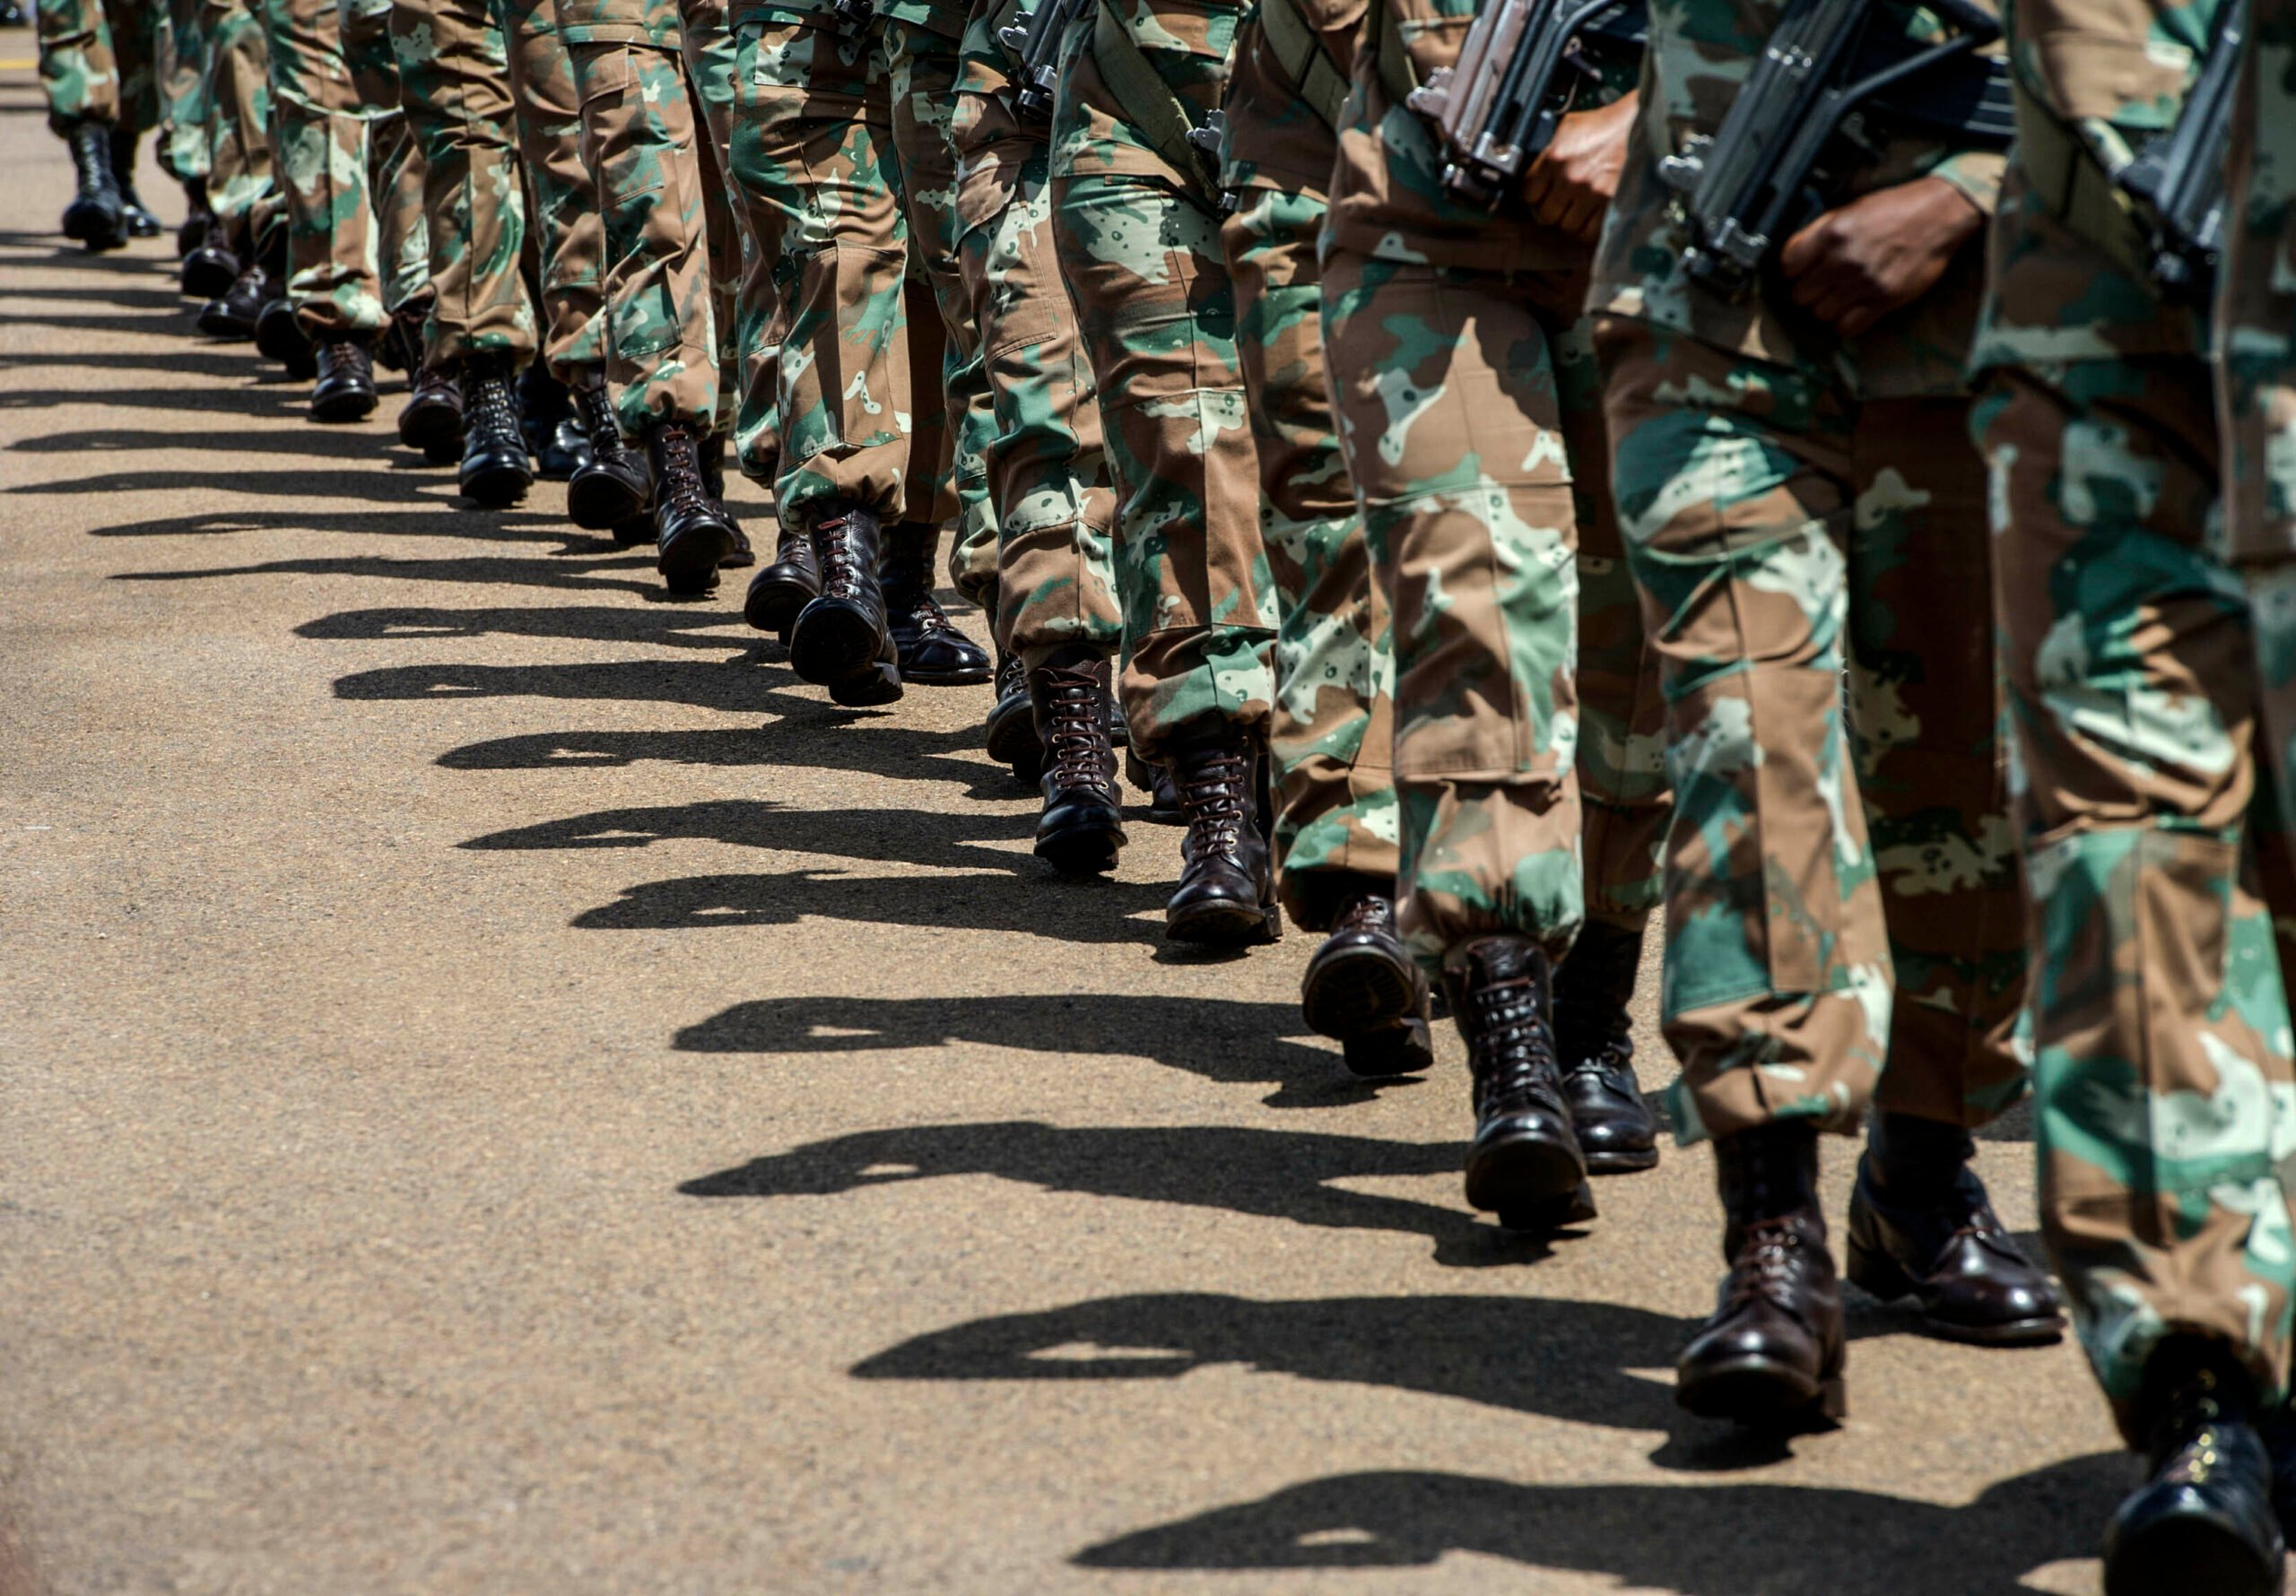 SANDF deployment to Eskom is pointless, say experts - The Mail & Guardian